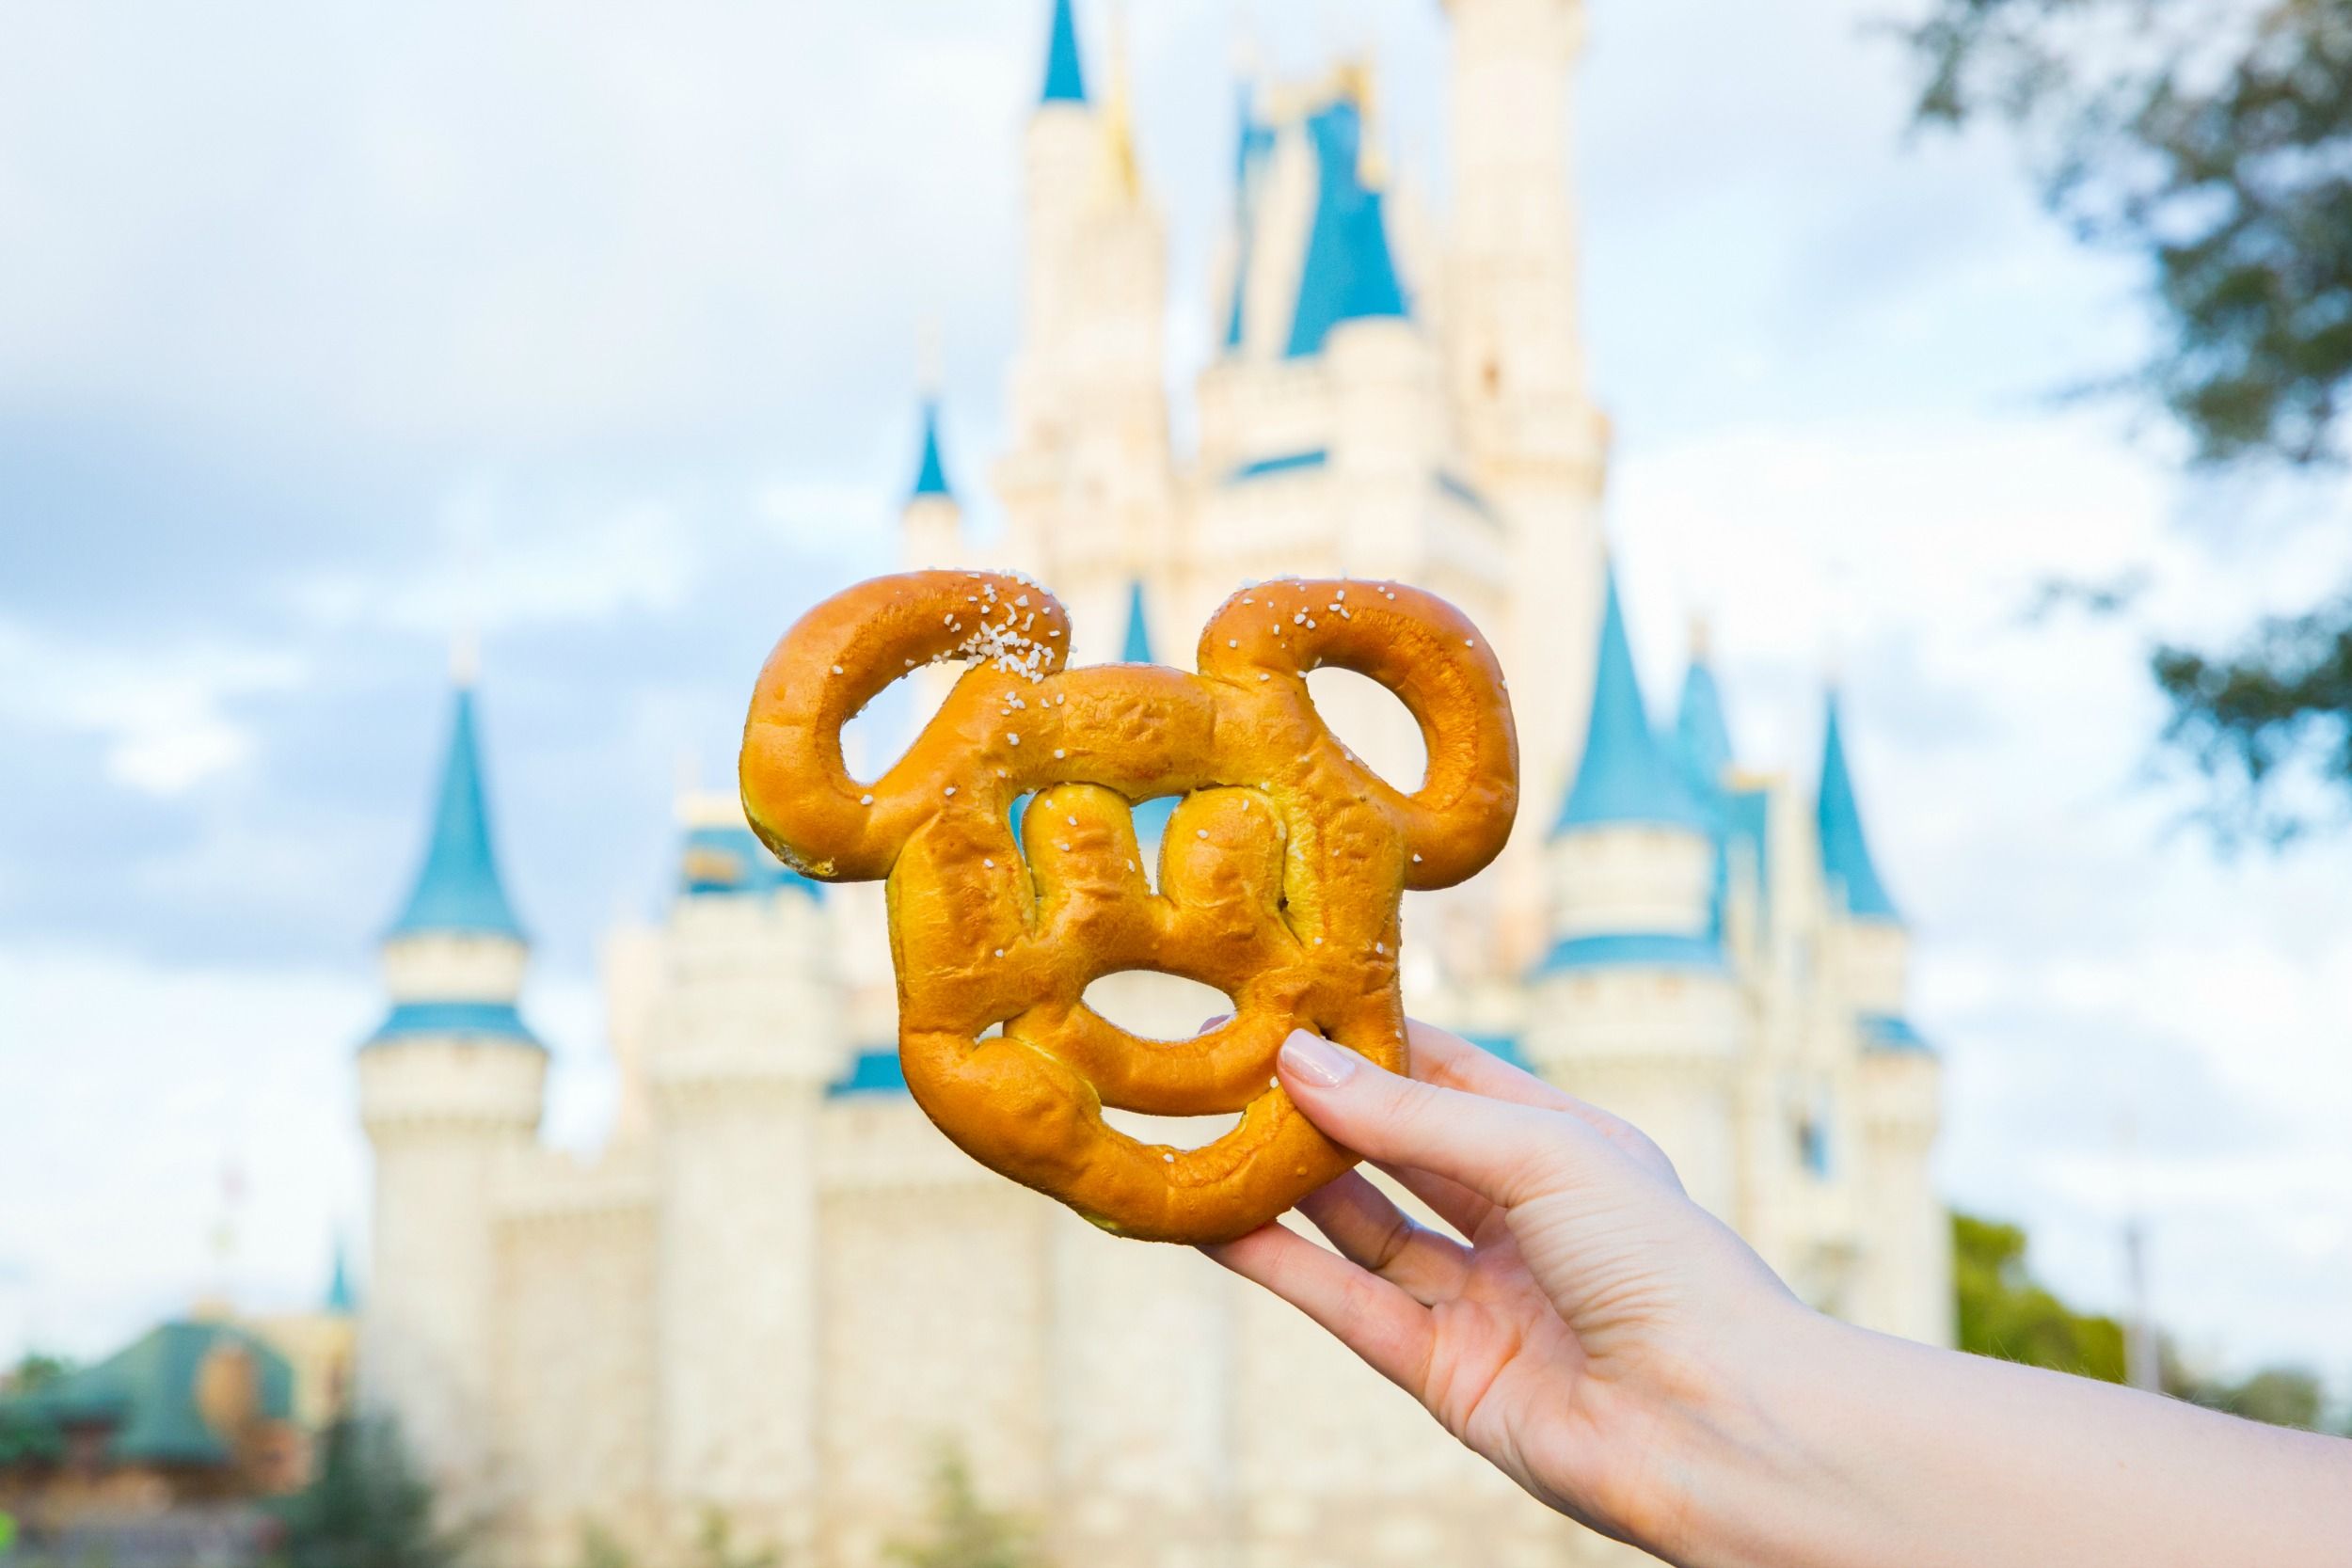 can you bring your own snacks into disney world